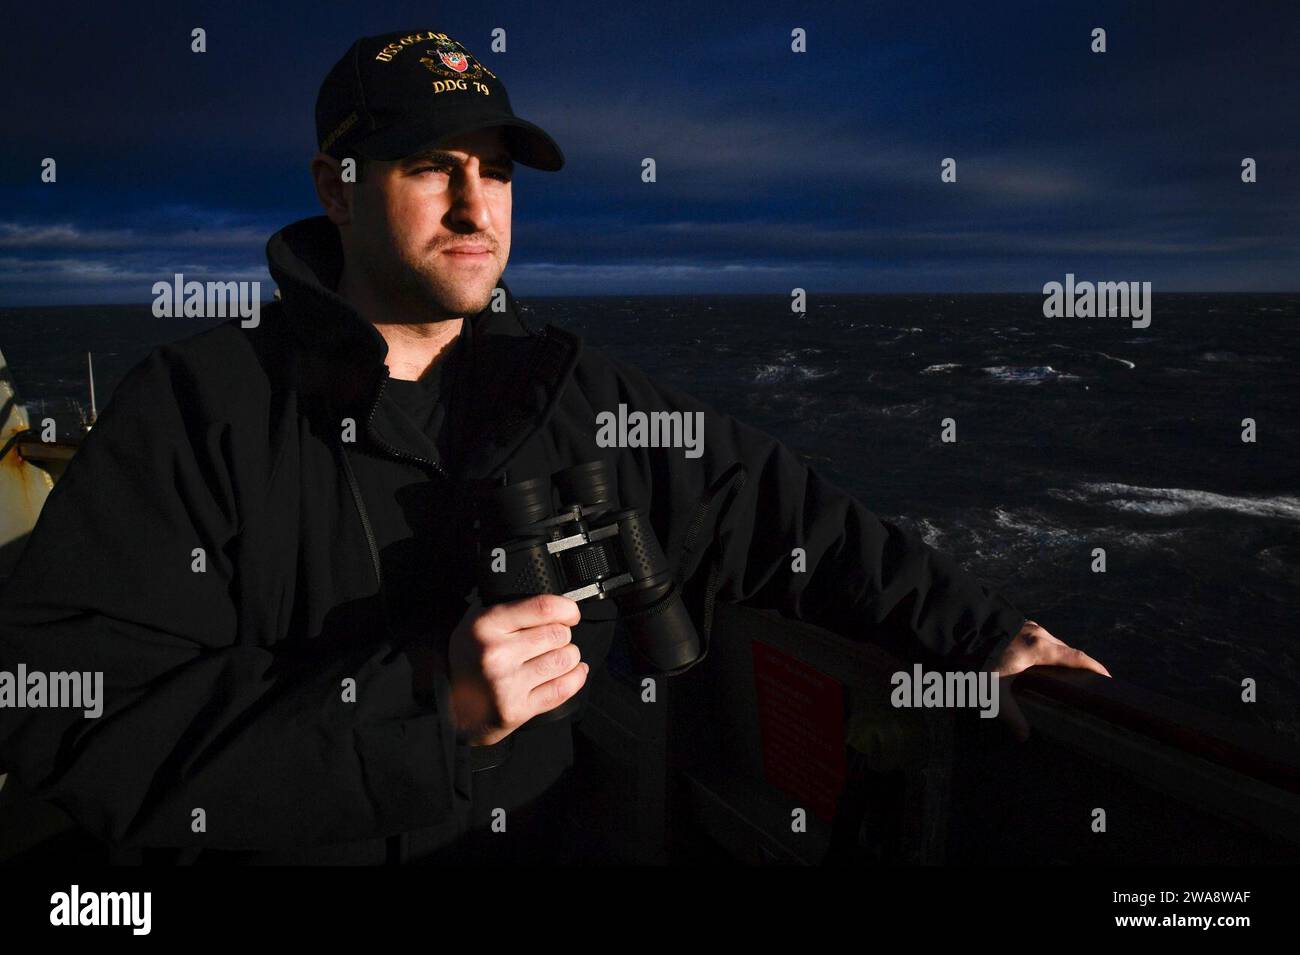 US military forces. 171017UY653-384  ATLANTIC OCEAN (Oct. 17, 2017) Lt. j.g. Andrew Cooper monitors the sea state from aboard the Arleigh Burke-class guided-missile destroyer, USS Oscar Austin (DDG 79), Oct. 17, 2017. Oscar Austin is on a routine deployment supporting U.S. national security interests in Europe, and increasing theater security cooperation and forward naval presence in the U.S. 6th Fleet area of operations. (U.S. Navy photo by Mass Communication Specialist 2nd Class Ryan Utah Kledzik/Released) Stock Photo